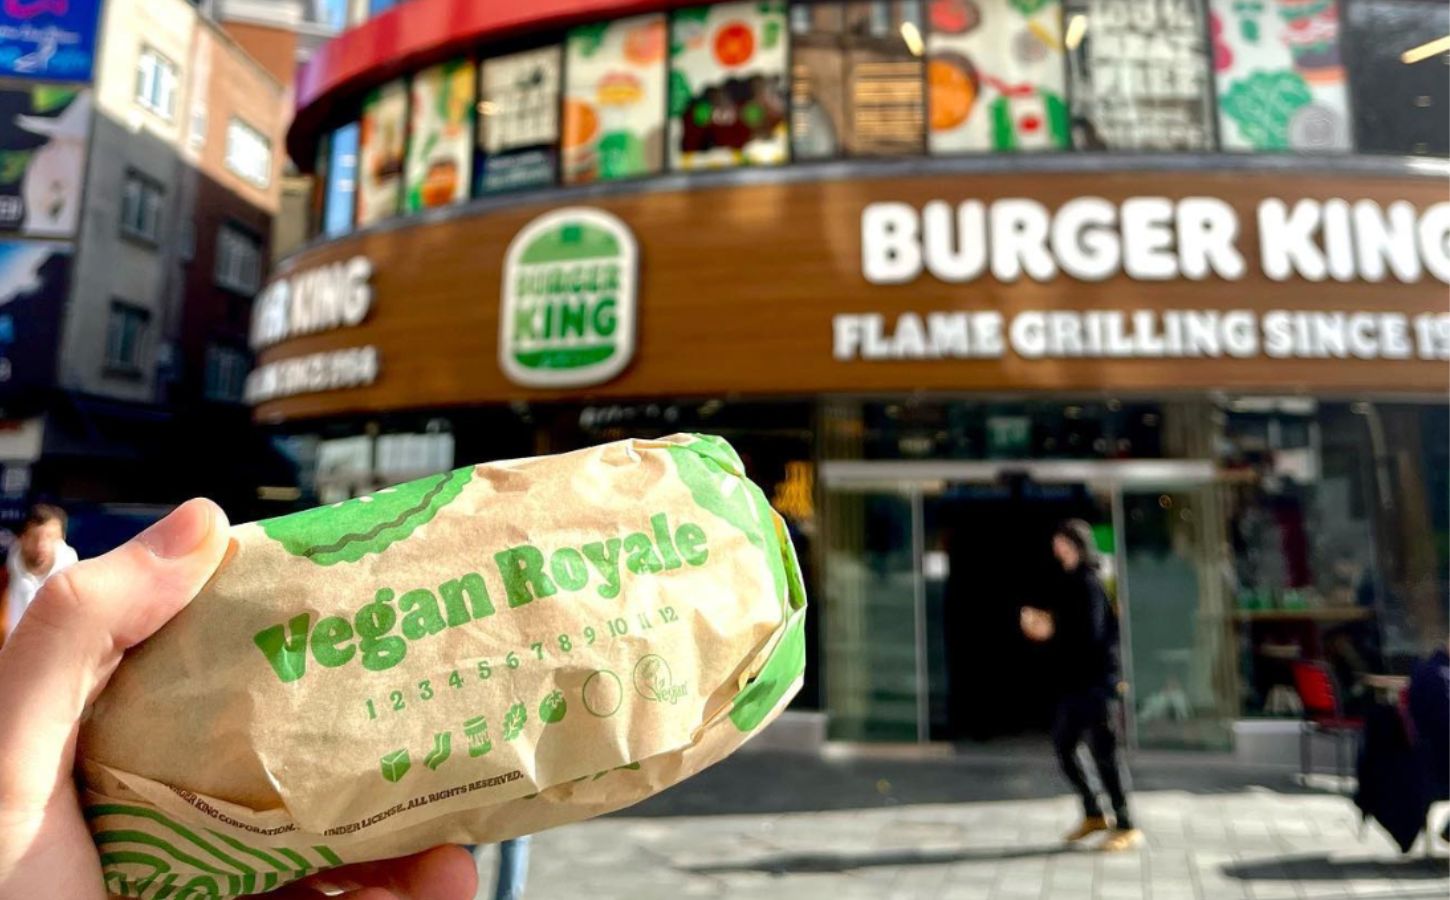 Someone holding a Vegan Royale in front of the vegan Burger King in Leicester Square